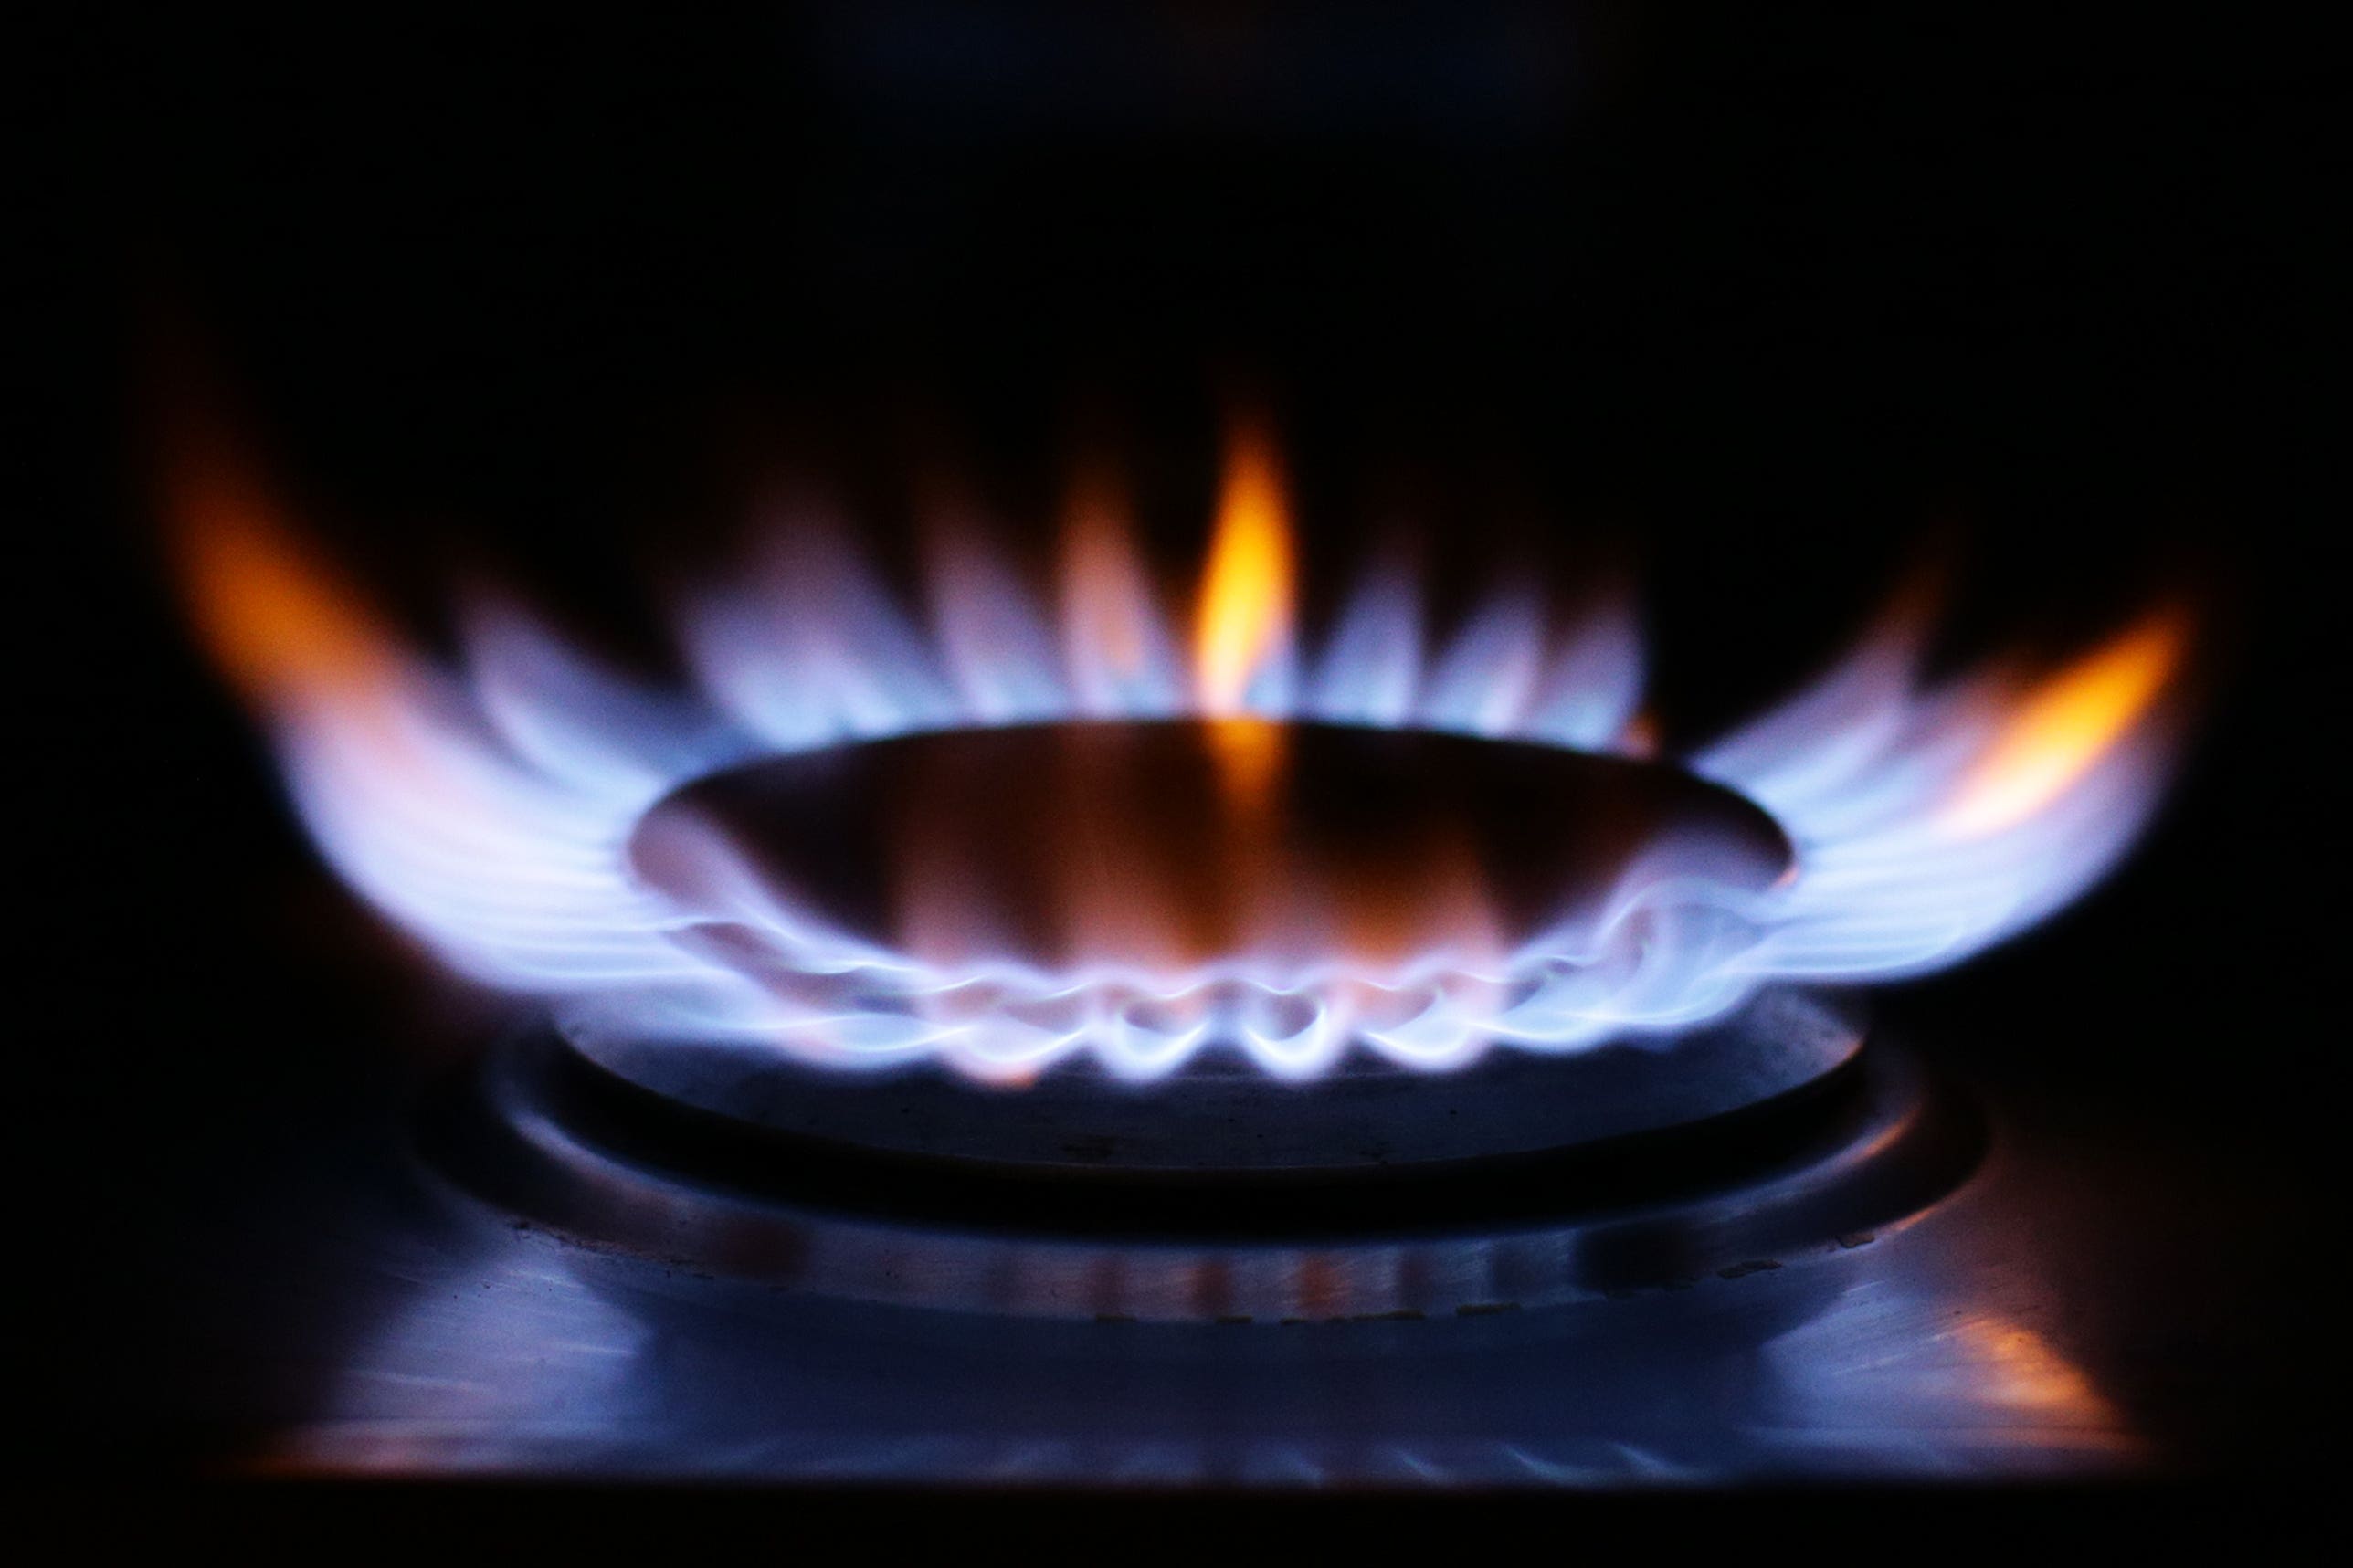 Britons are estimated to pay ?173.55 per month this winter for energy, according to research